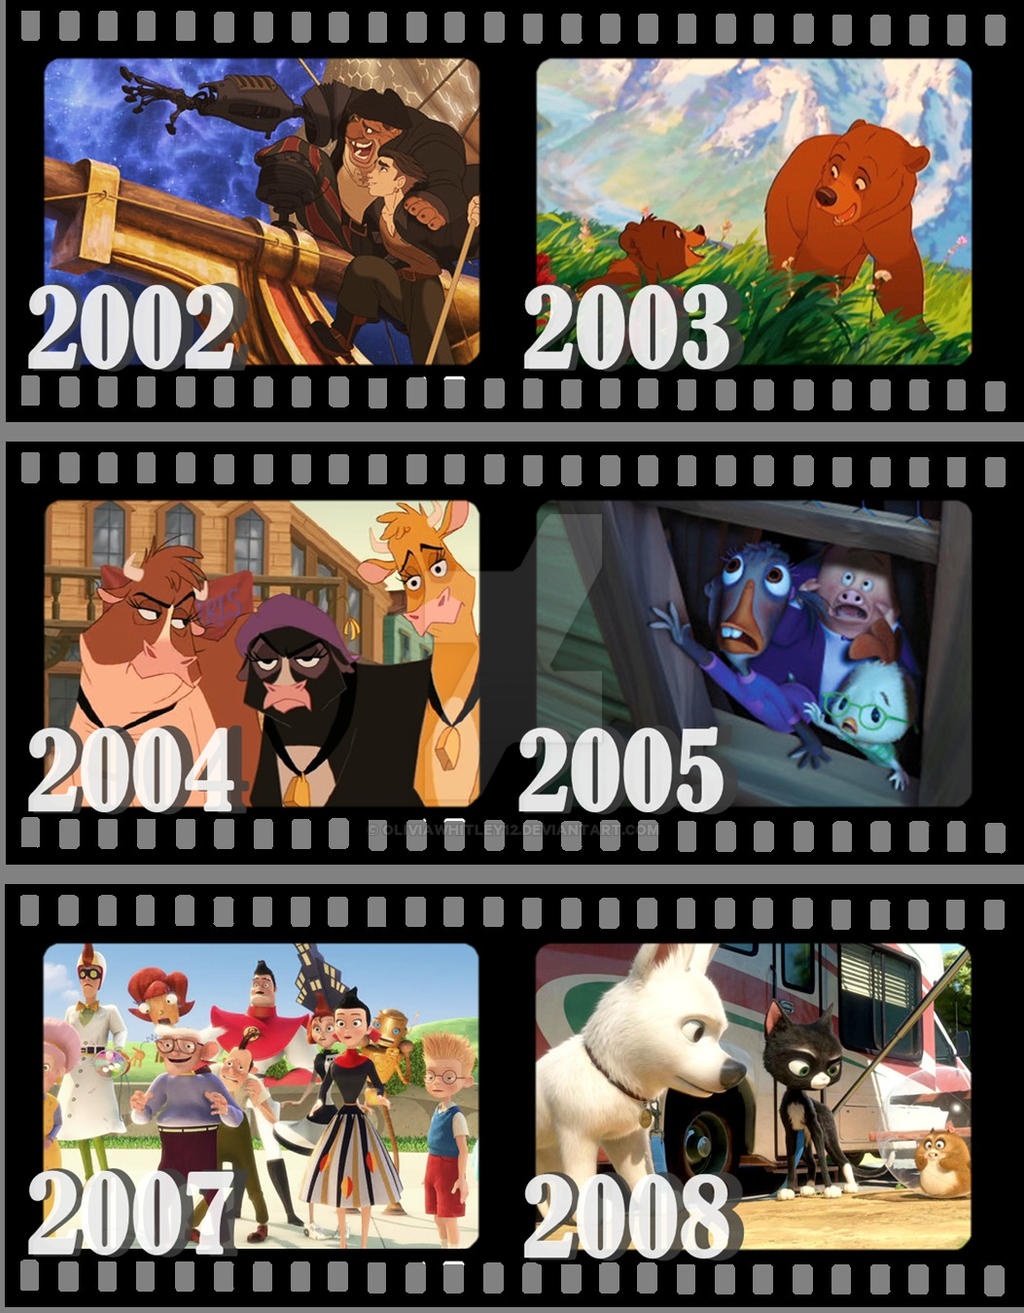 Disney Animated Movies 2002-2008 by OliviaWhitley12 on DeviantArt